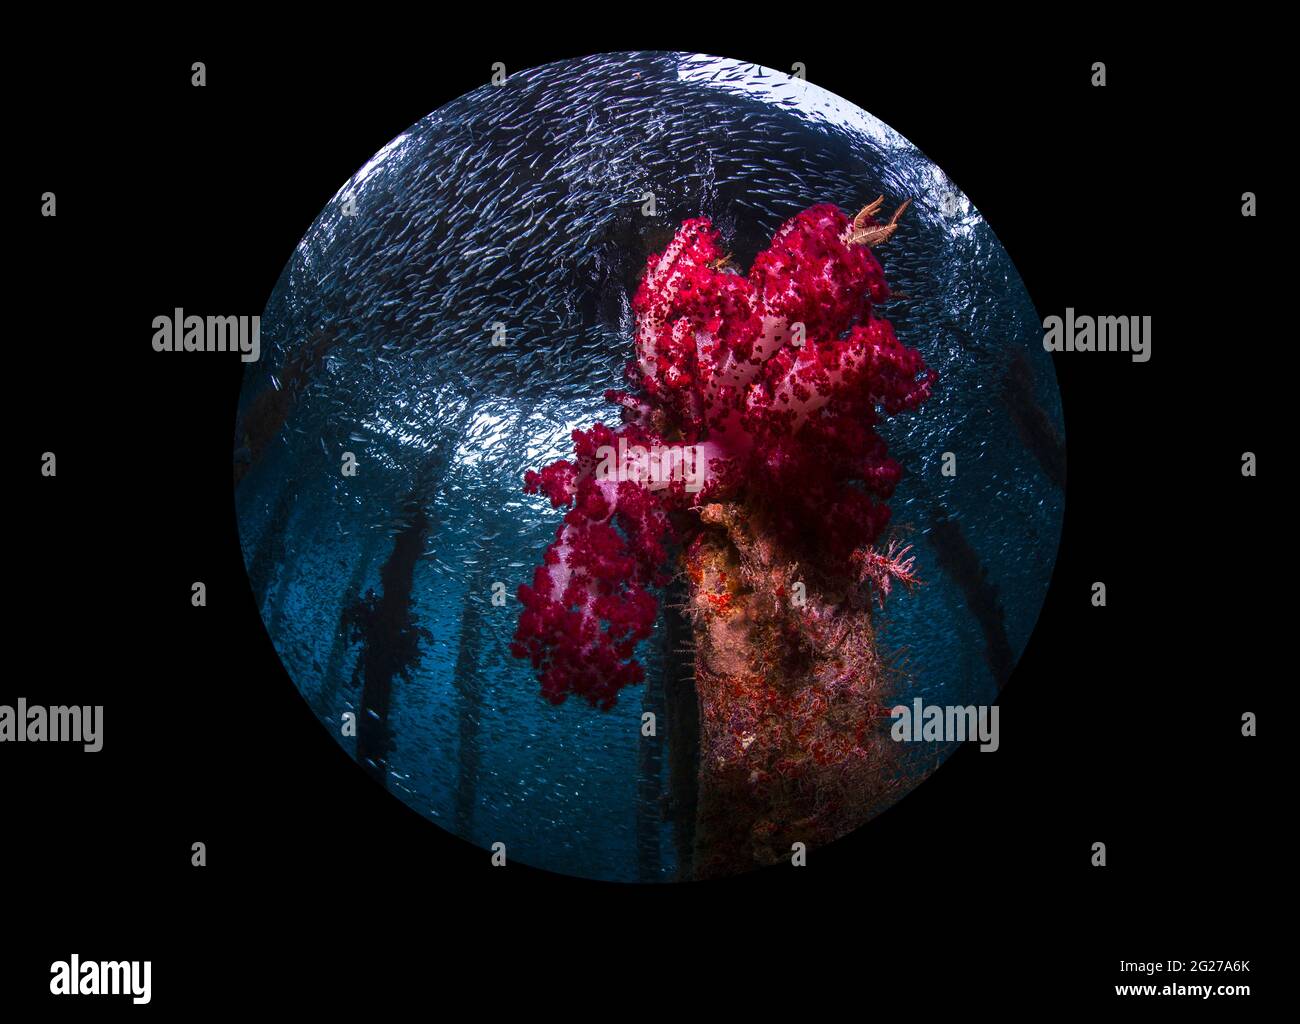 Bright red soft coral growing from a pillar under a jetty with silverside fish overhead, Raja Ampat, Indonesia. Stock Photo